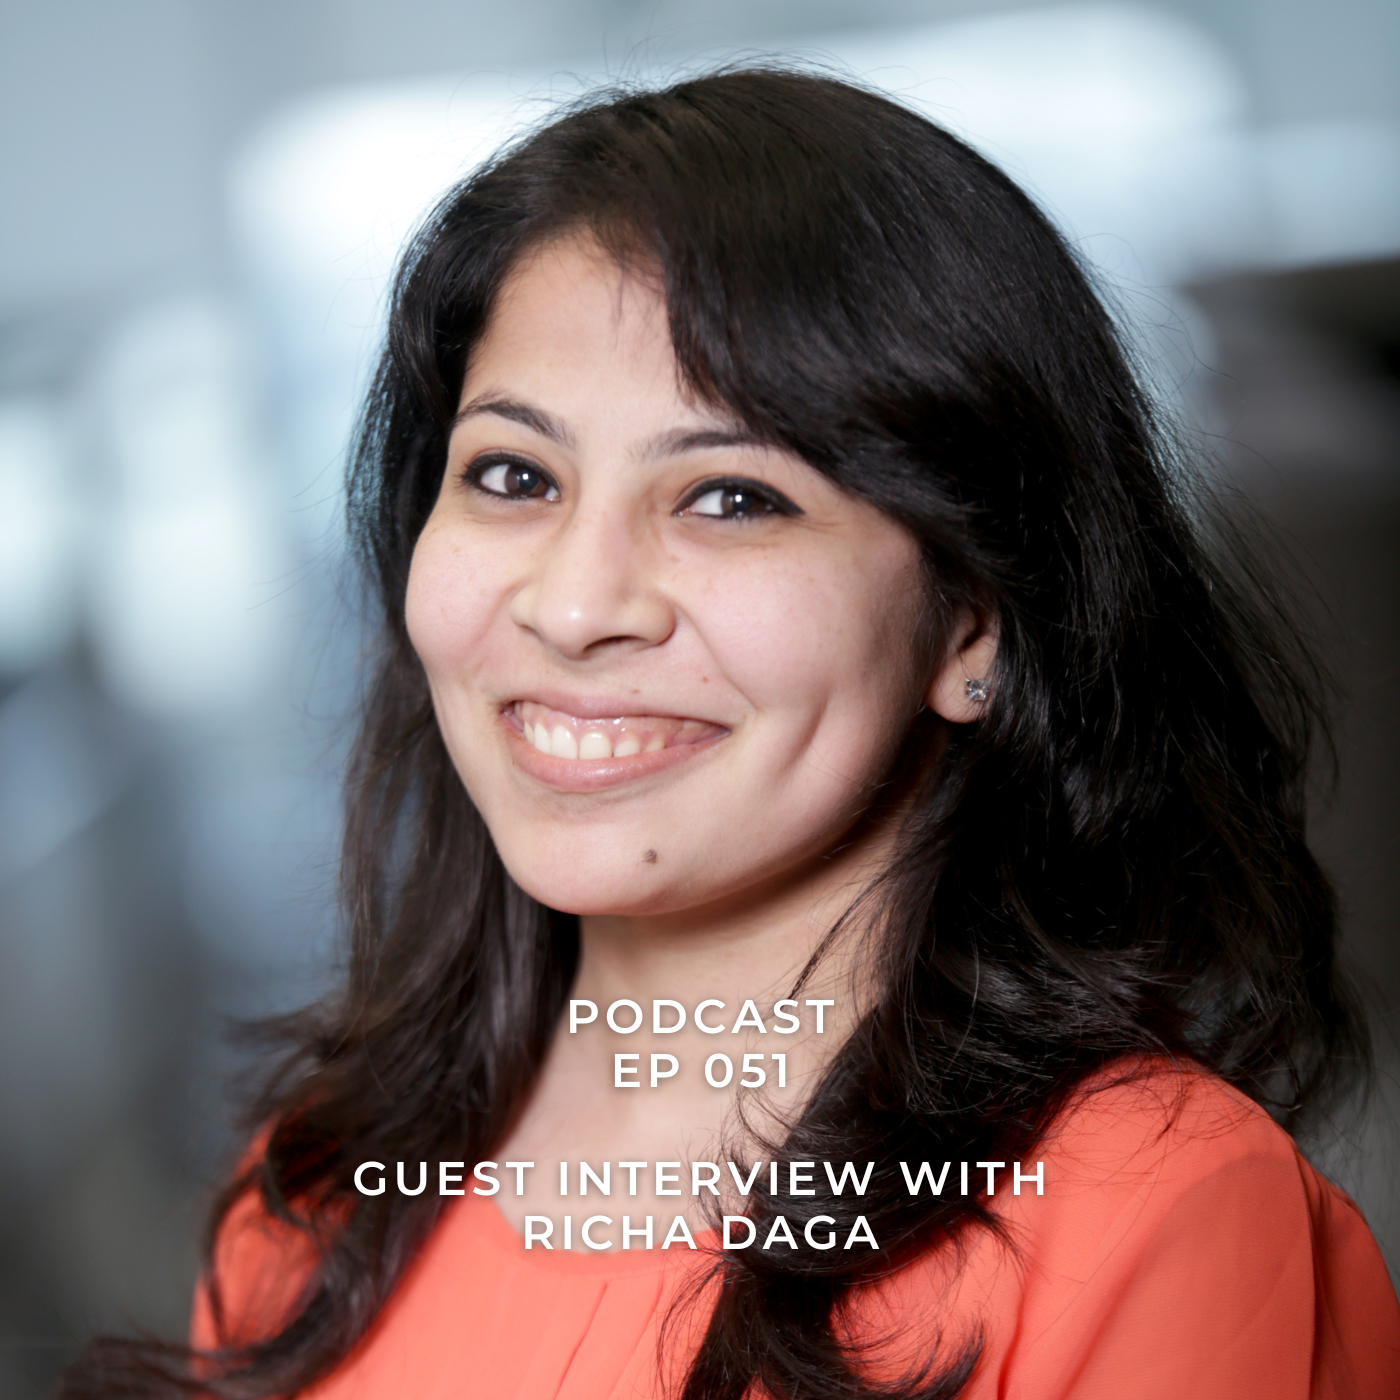 Guest Interview with Richa Daga